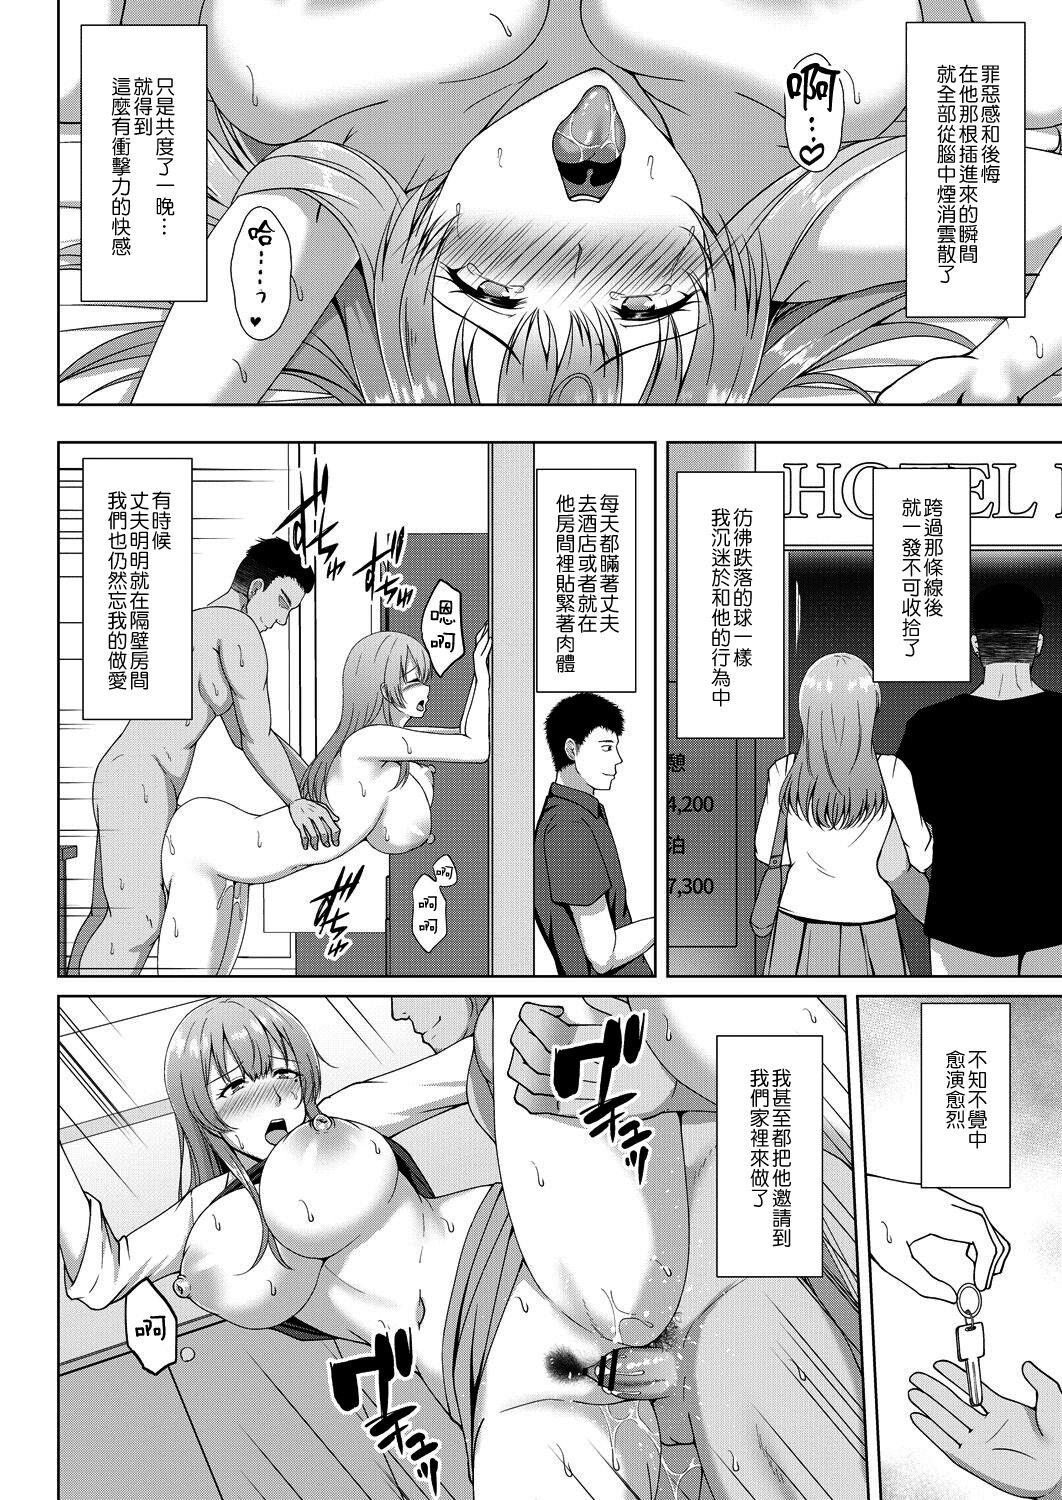 Blowjob Porn 比較と選択 Real Amateurs - Page 10